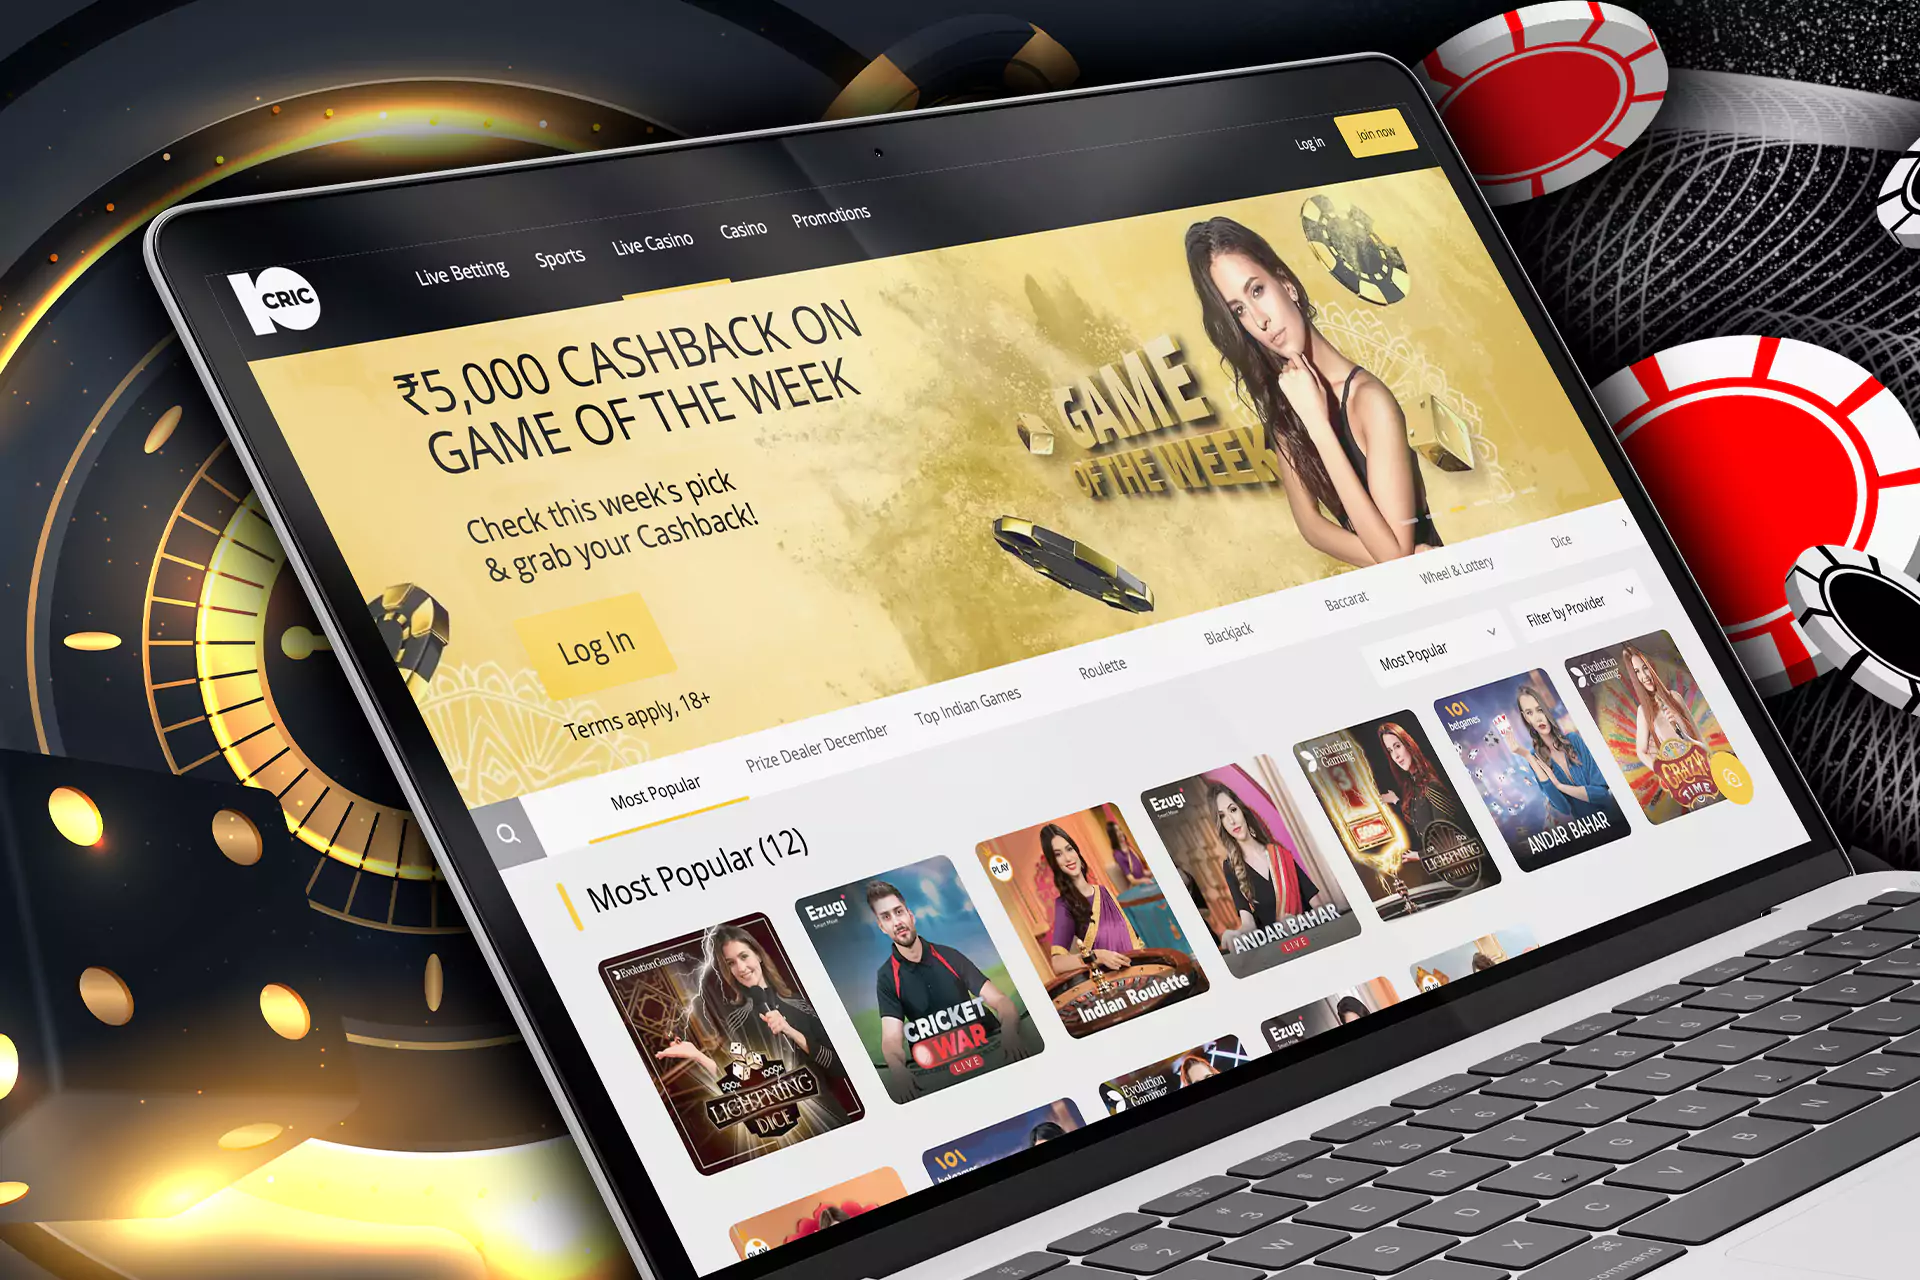 If you want to play online with live dealers, visit the 10Cric Live Casino.